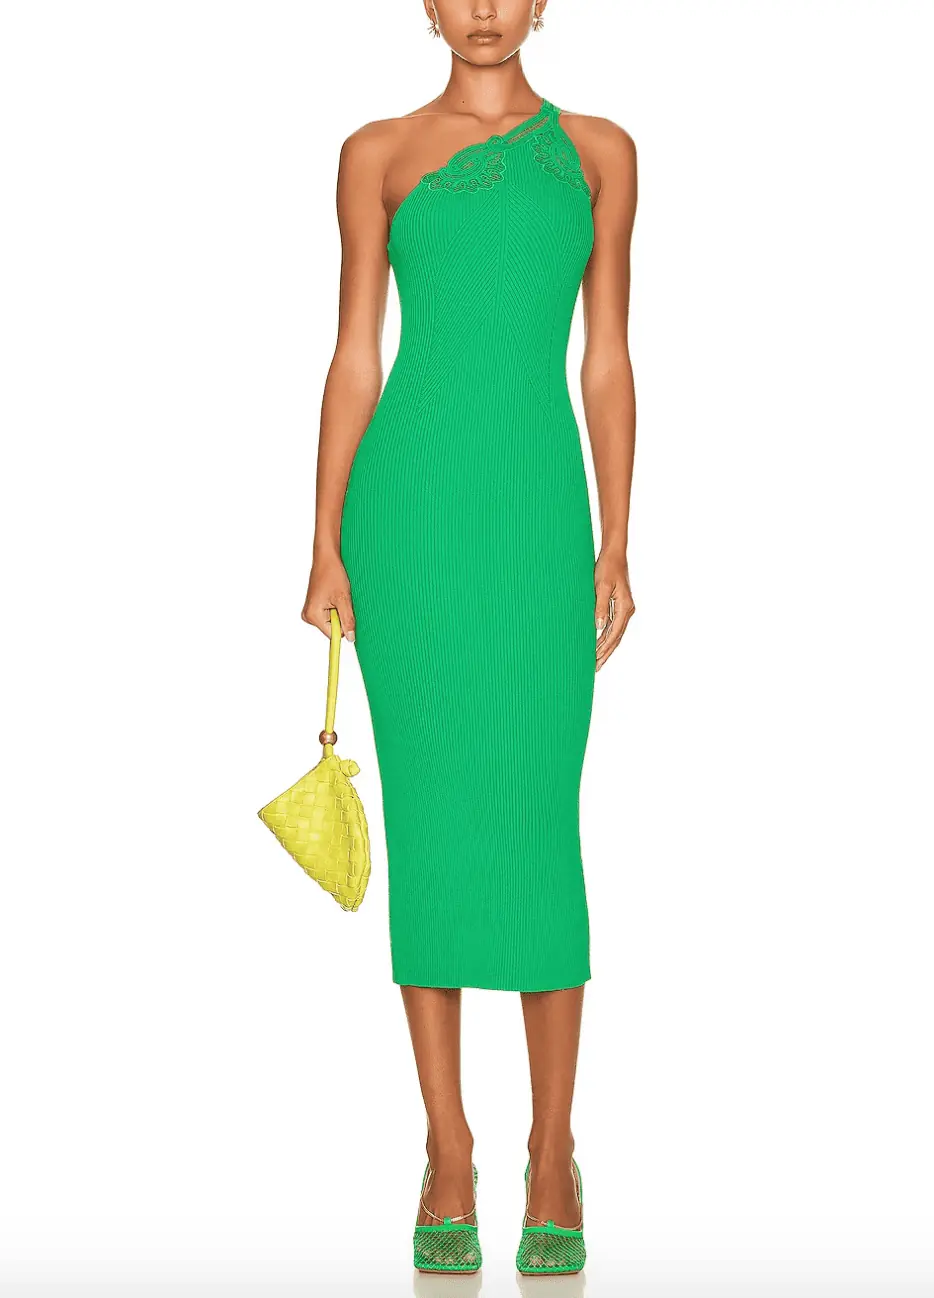 Emily Simpson's Green Lace One Shoulder Dress